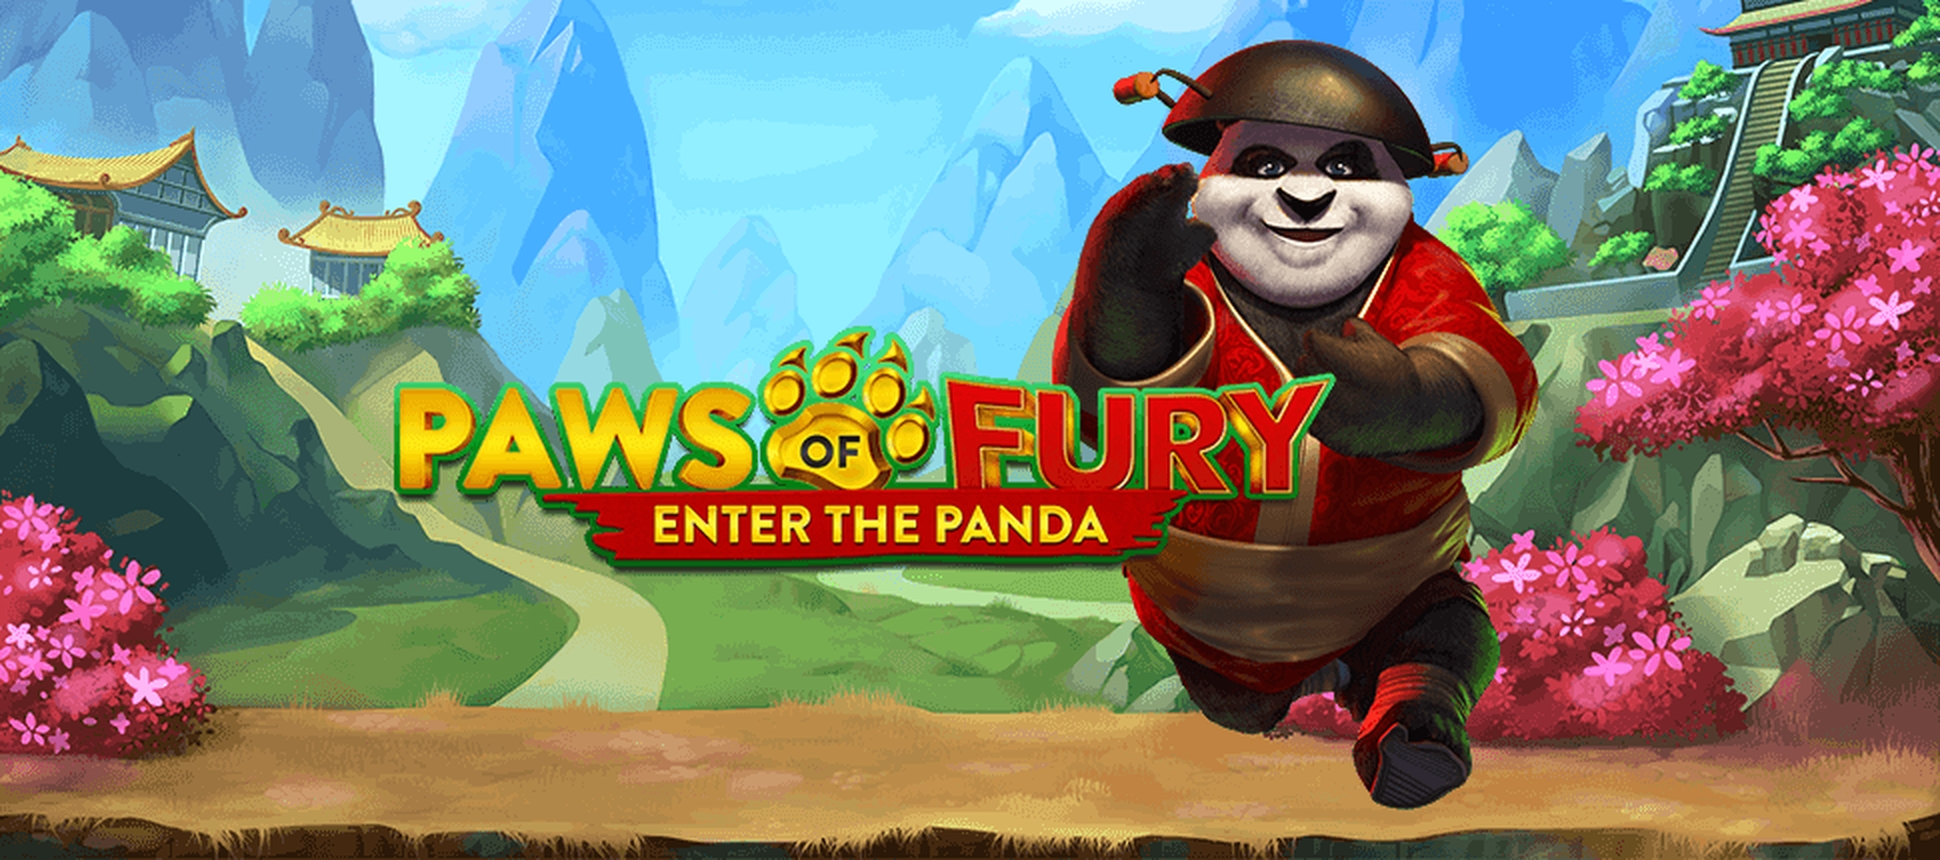 The Paws of Fury Online Slot Demo Game by Blueprint Gaming